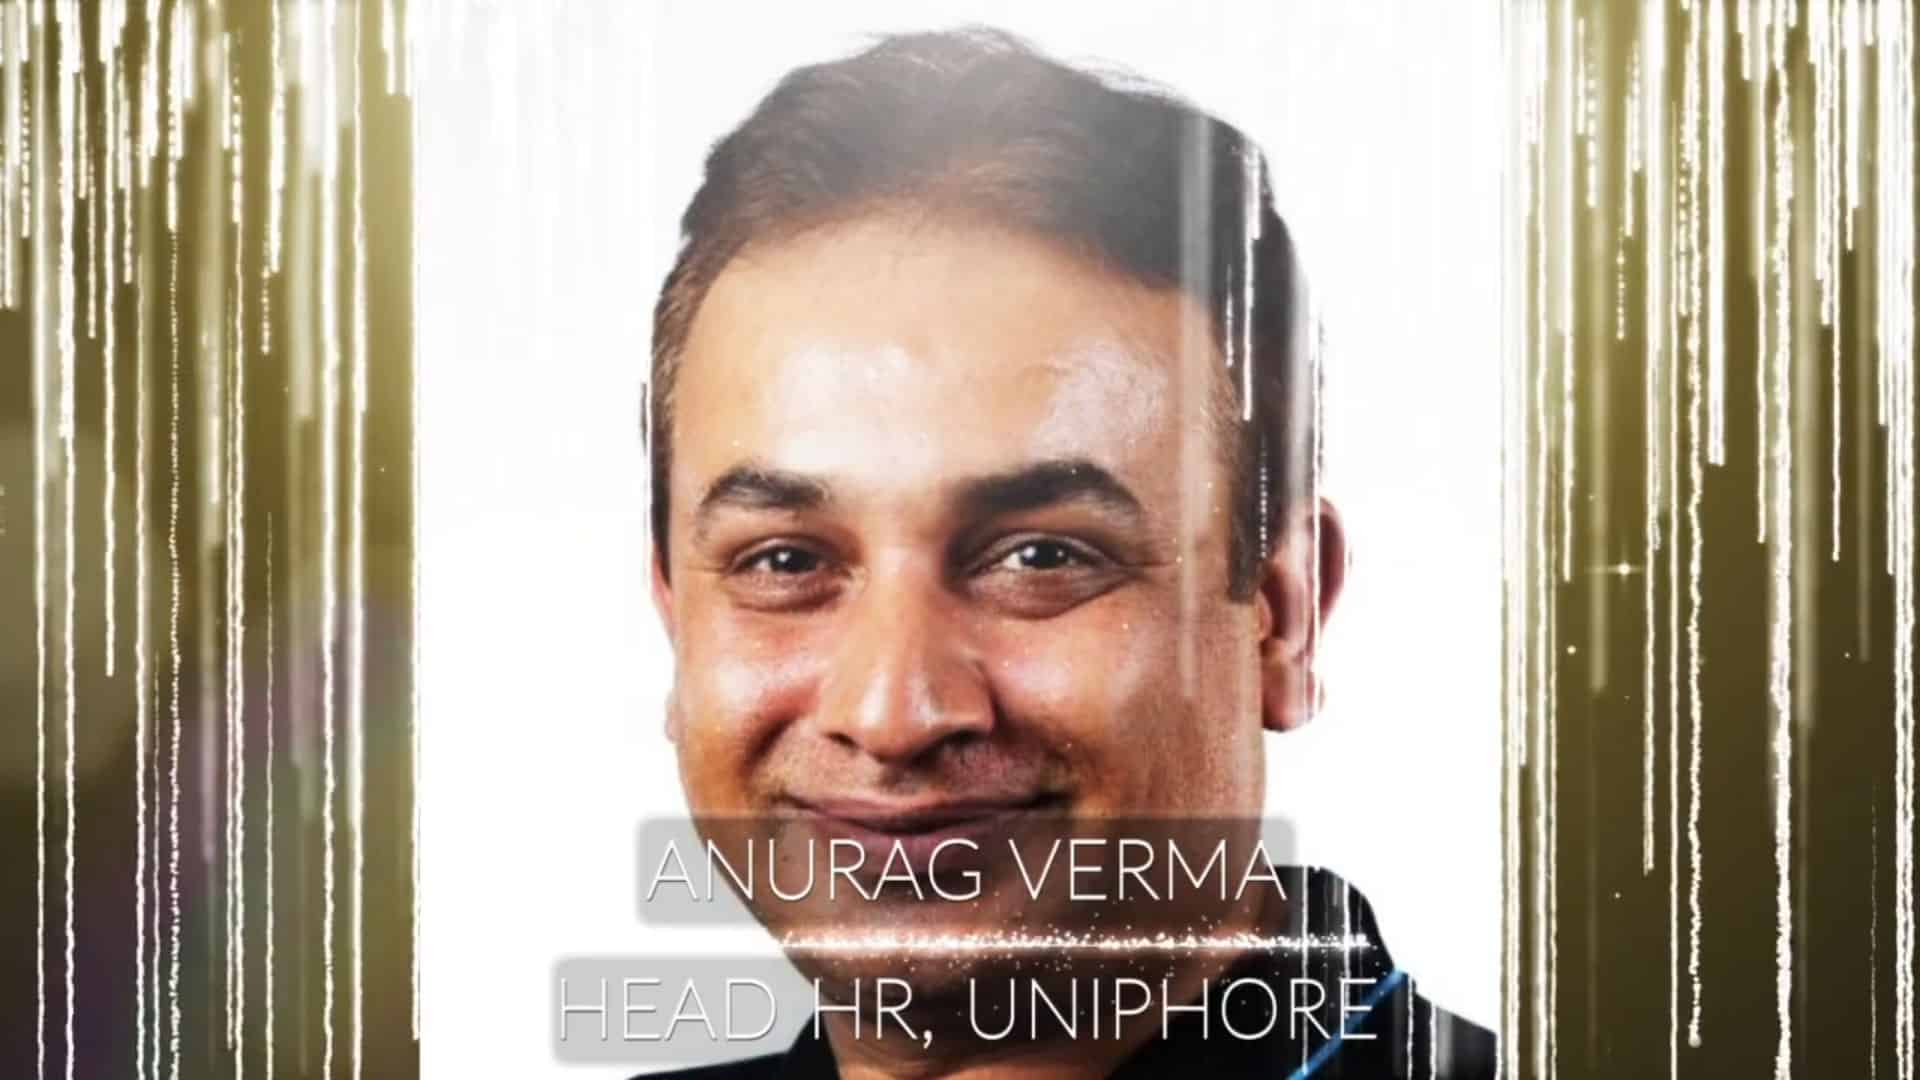 Acclaiming Mr. Anurag Verma’s spirit of leadership that is rooted in people.